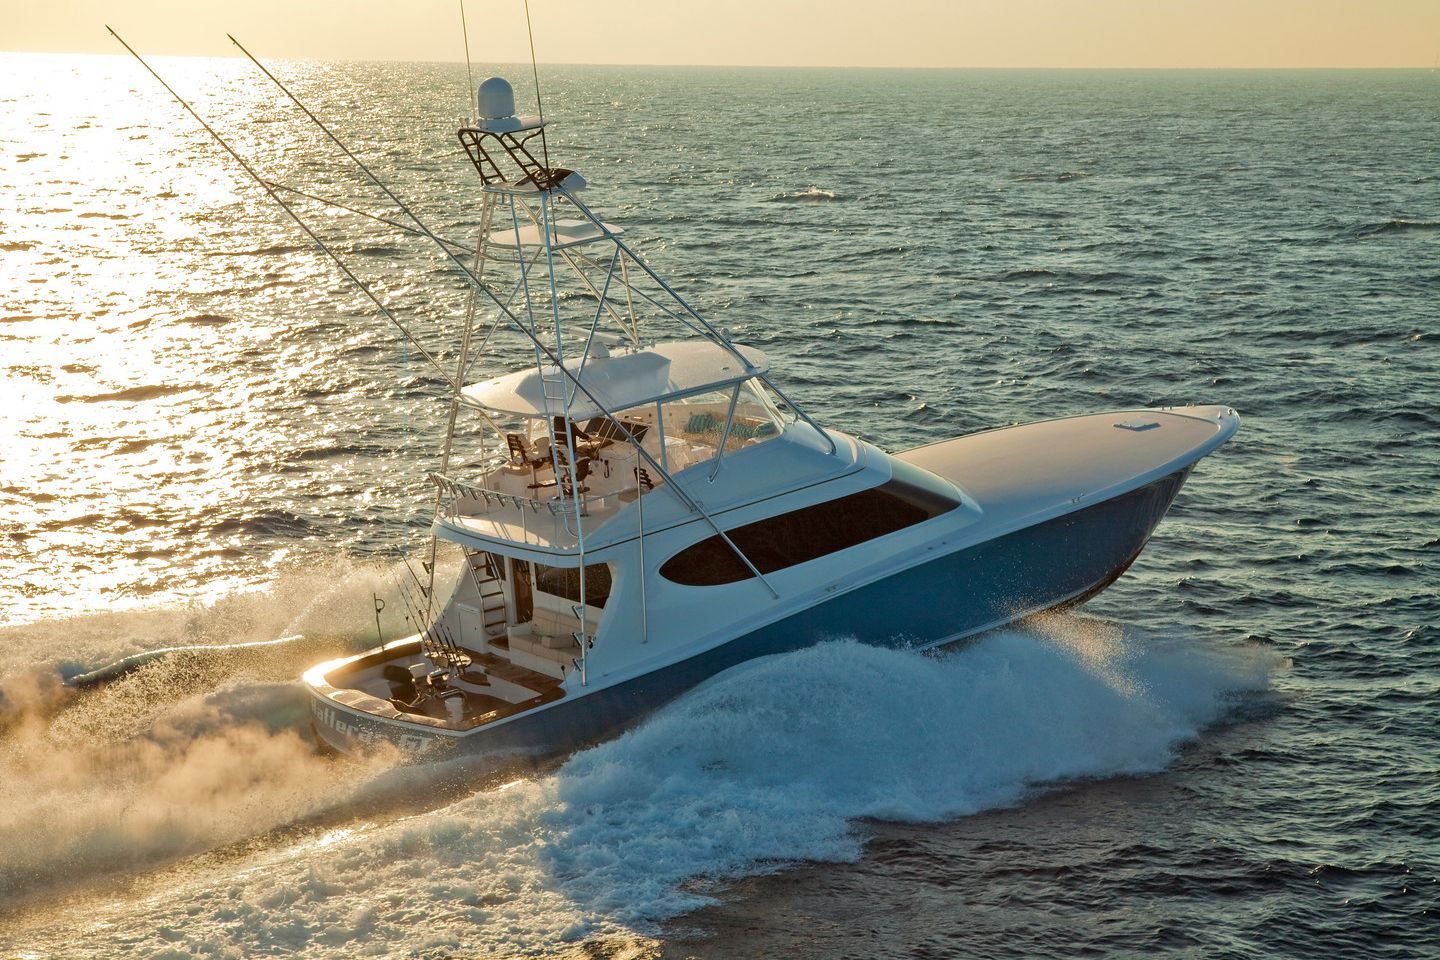 360 VR Virtual Tours of the Hatteras GT70